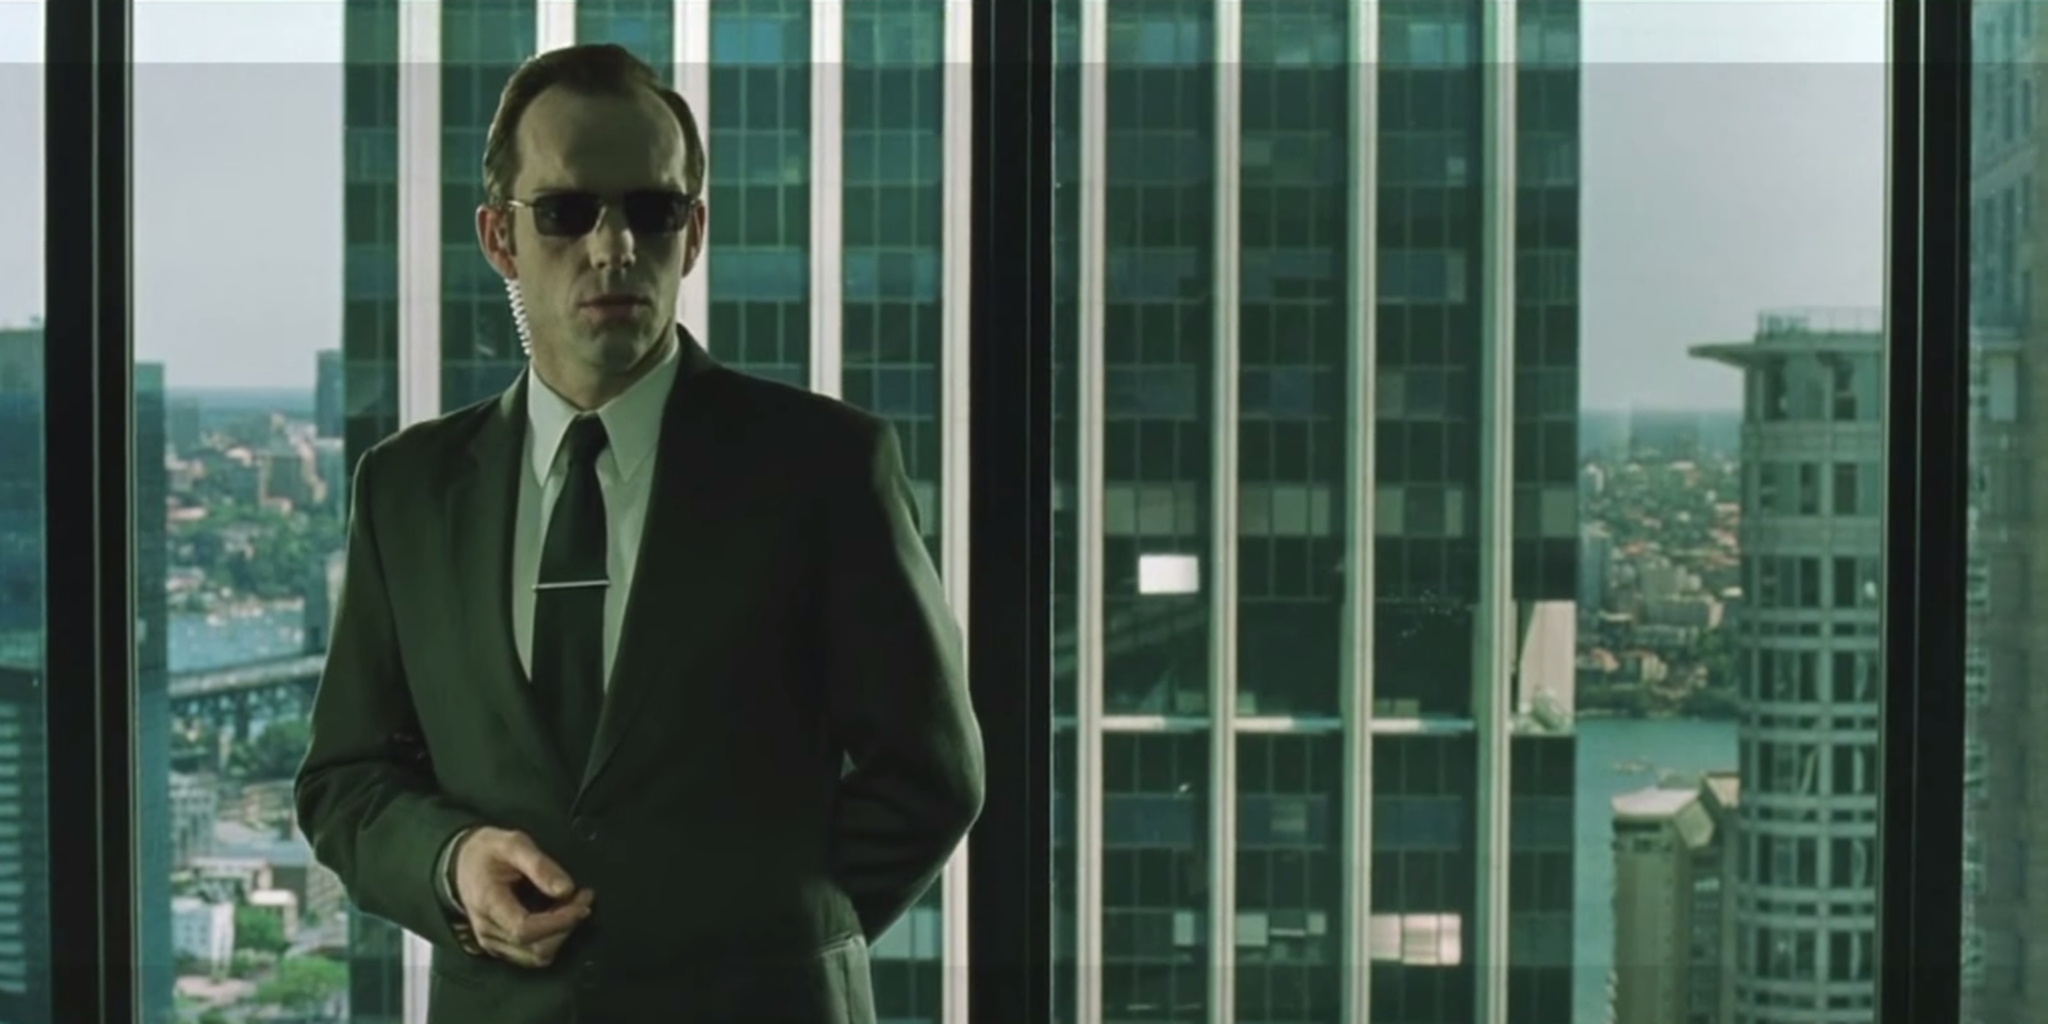 Hugo Weaving's Agent Smith won't be there in 'The Matrix 4'